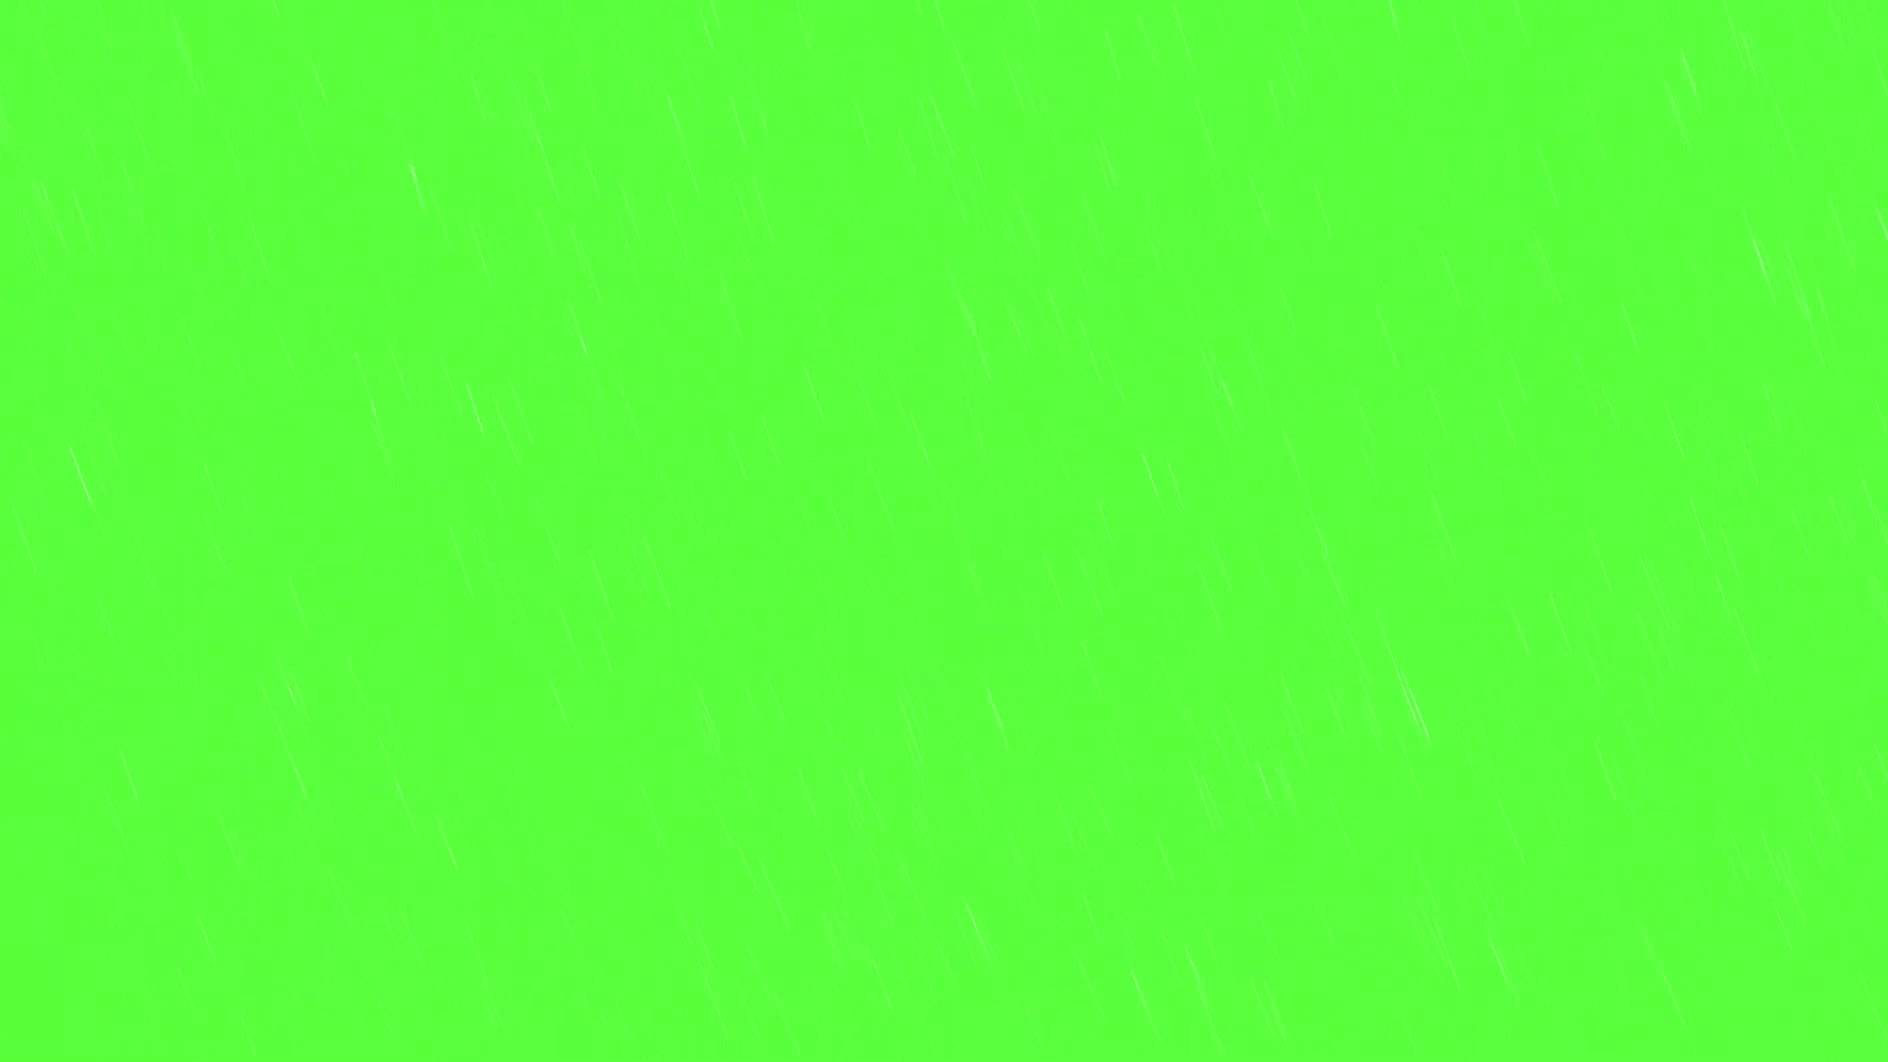 I made a green screen of the double tap animation, have a go - Imgur